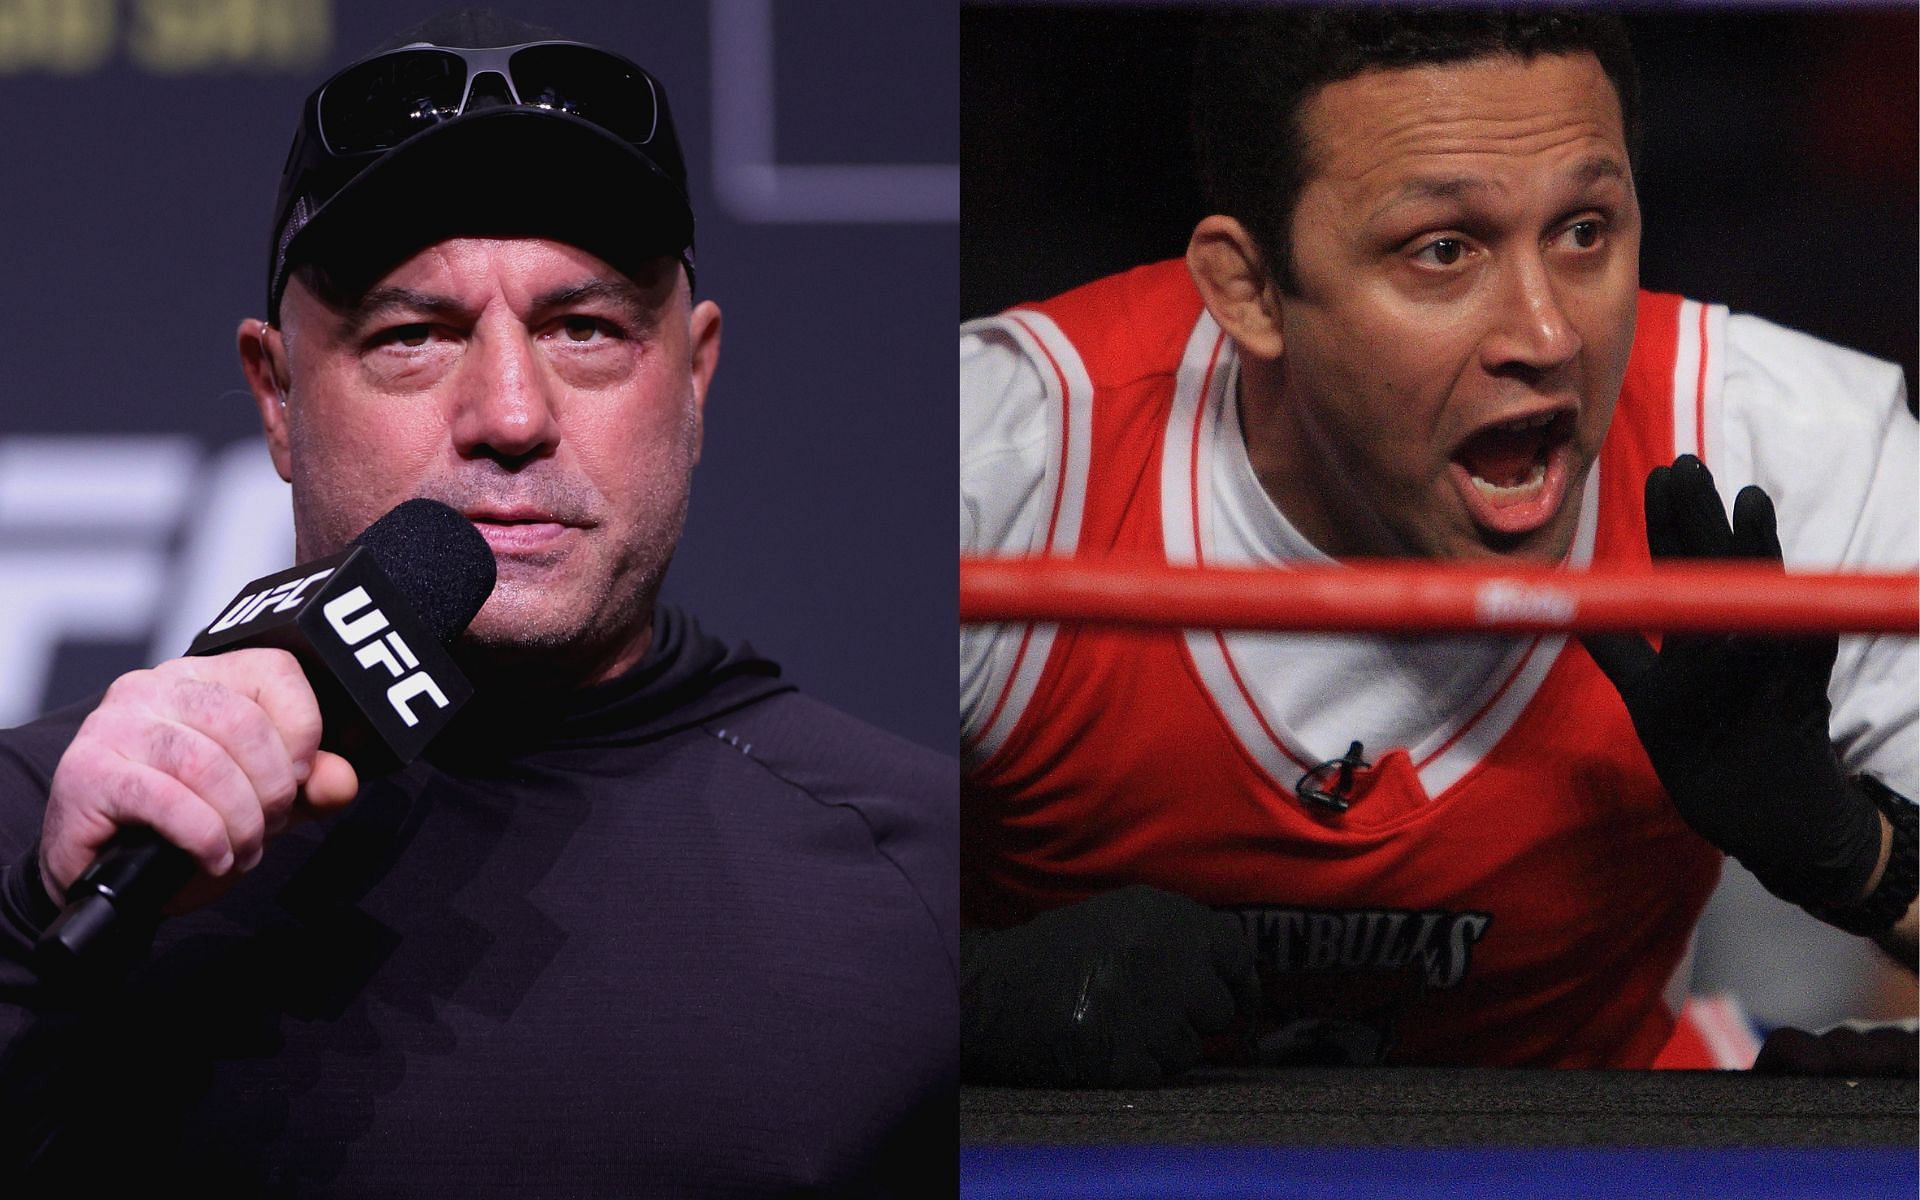 Joe Rogan (left) and Renzo Gracie (right). [Images courtesy: both images courtesy Getty Images]